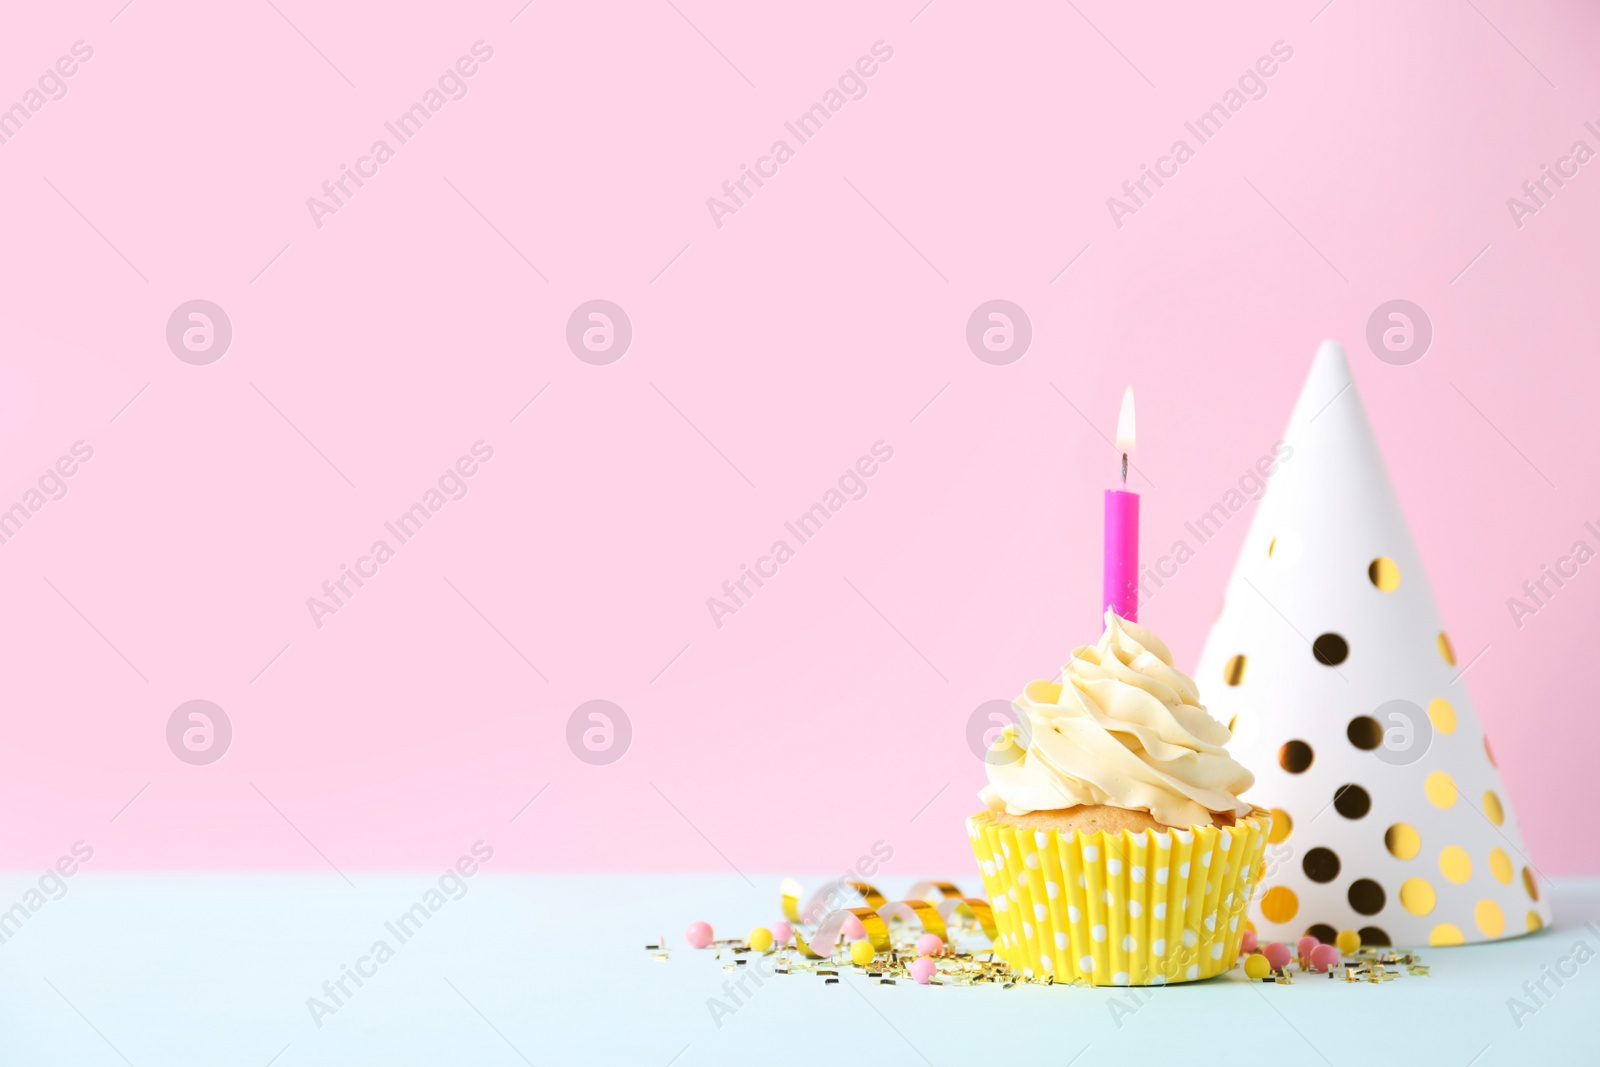 Photo of Delicious birthday cupcake with burning candle and party decor on white table against pink background, space for text